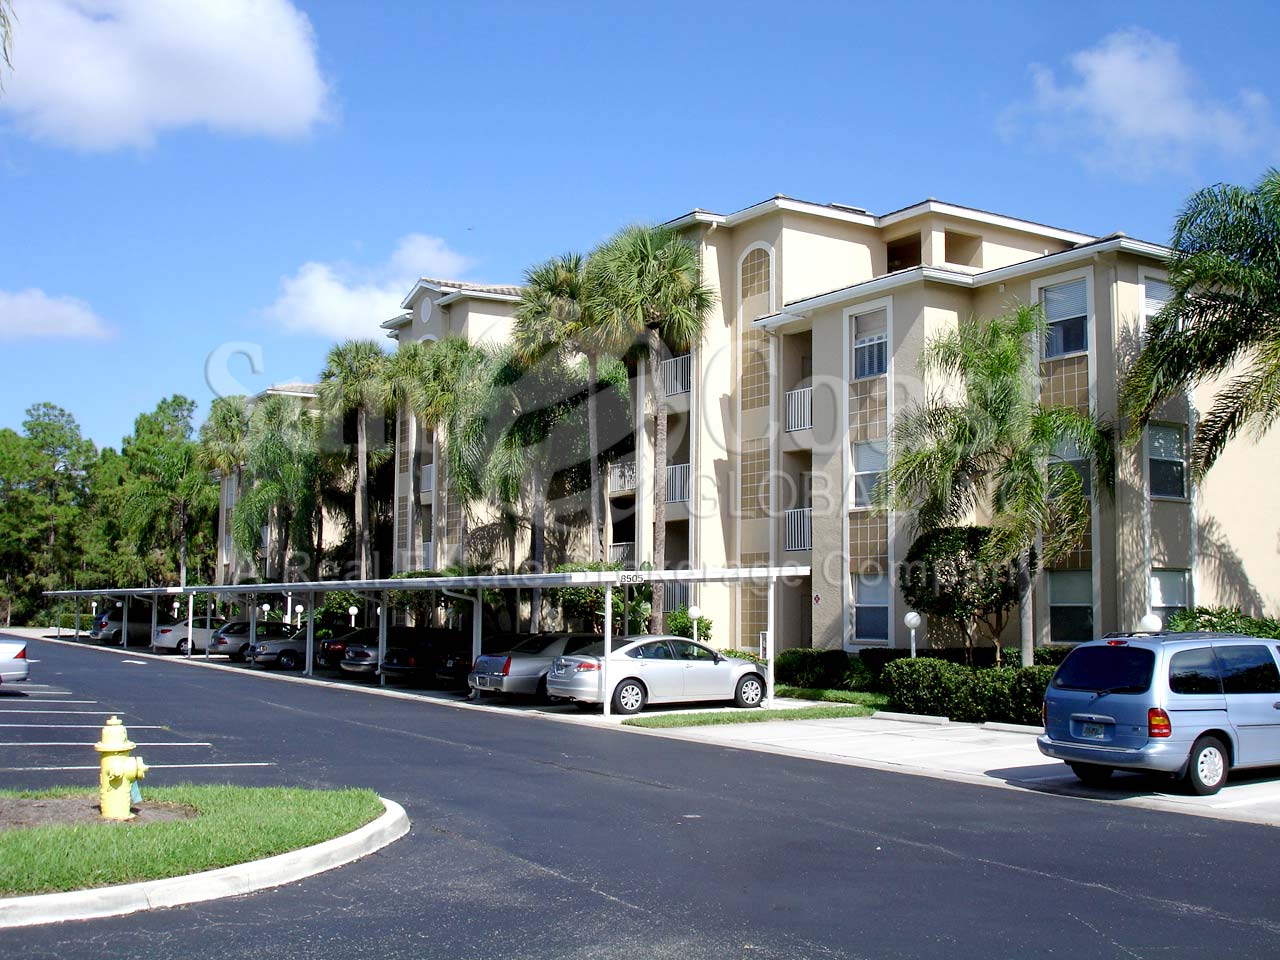 Prestwick is a 4-story condo complex with car ports.